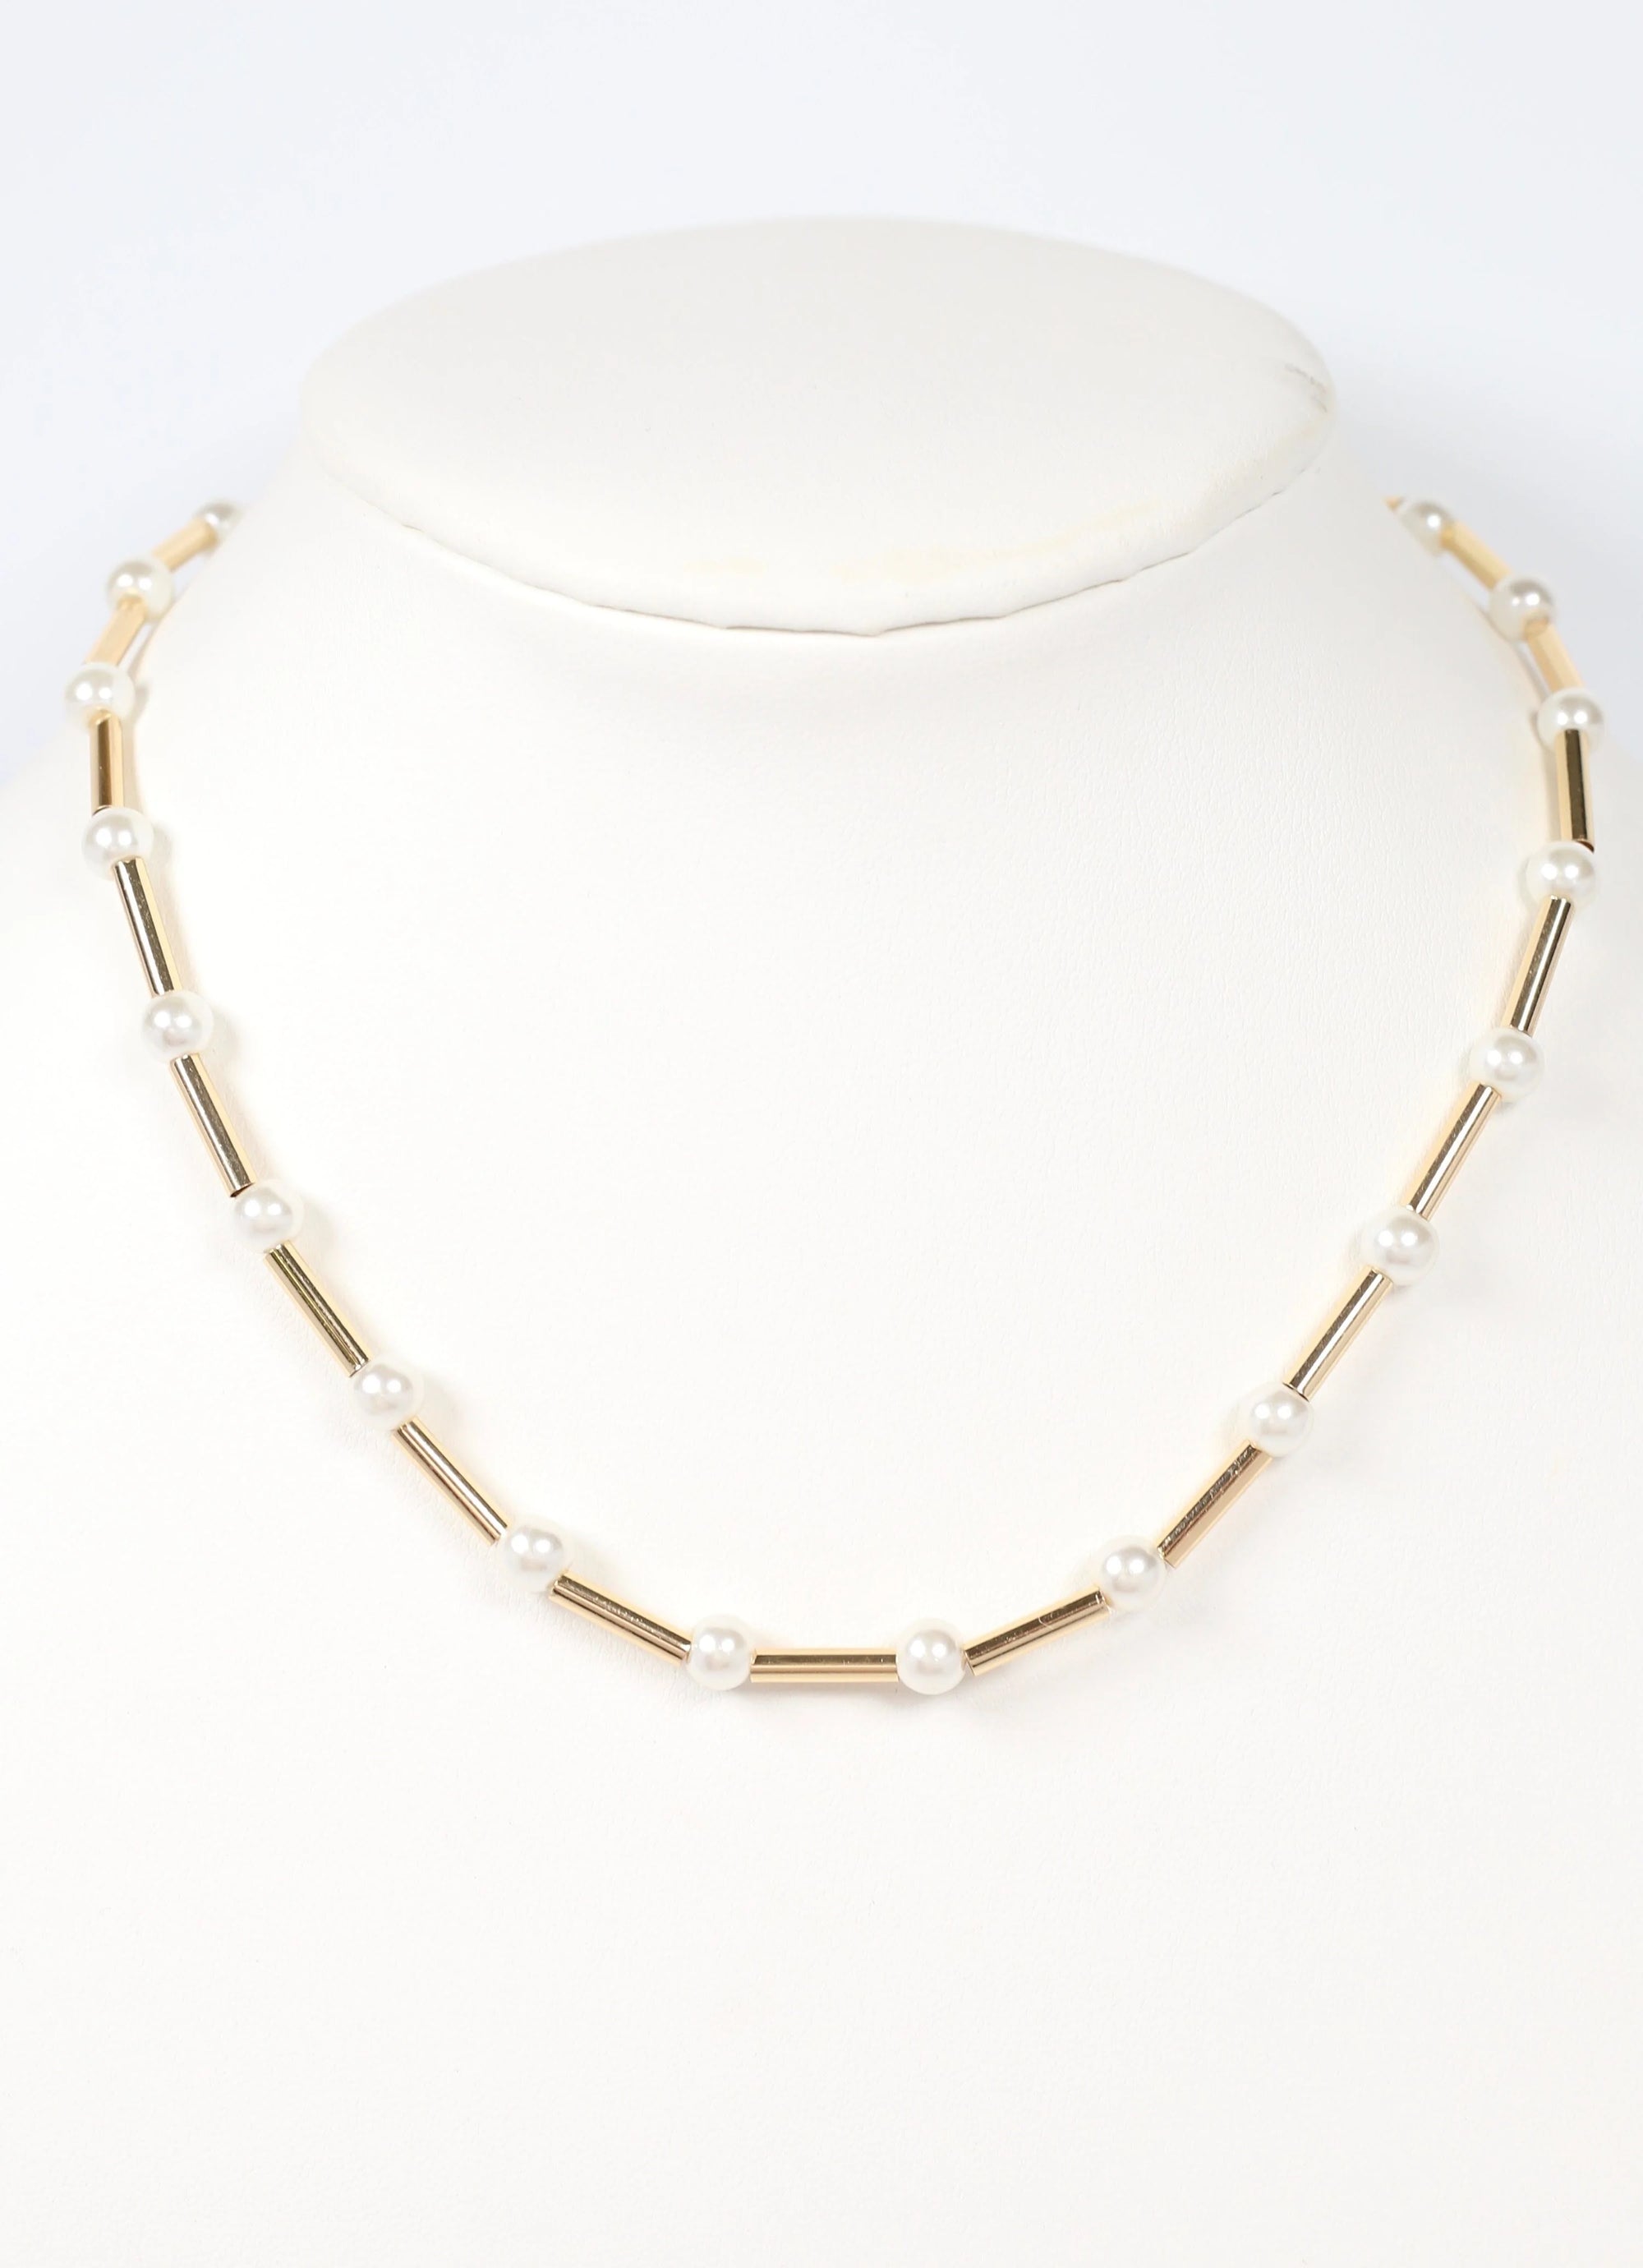 Viscount Tube Necklace